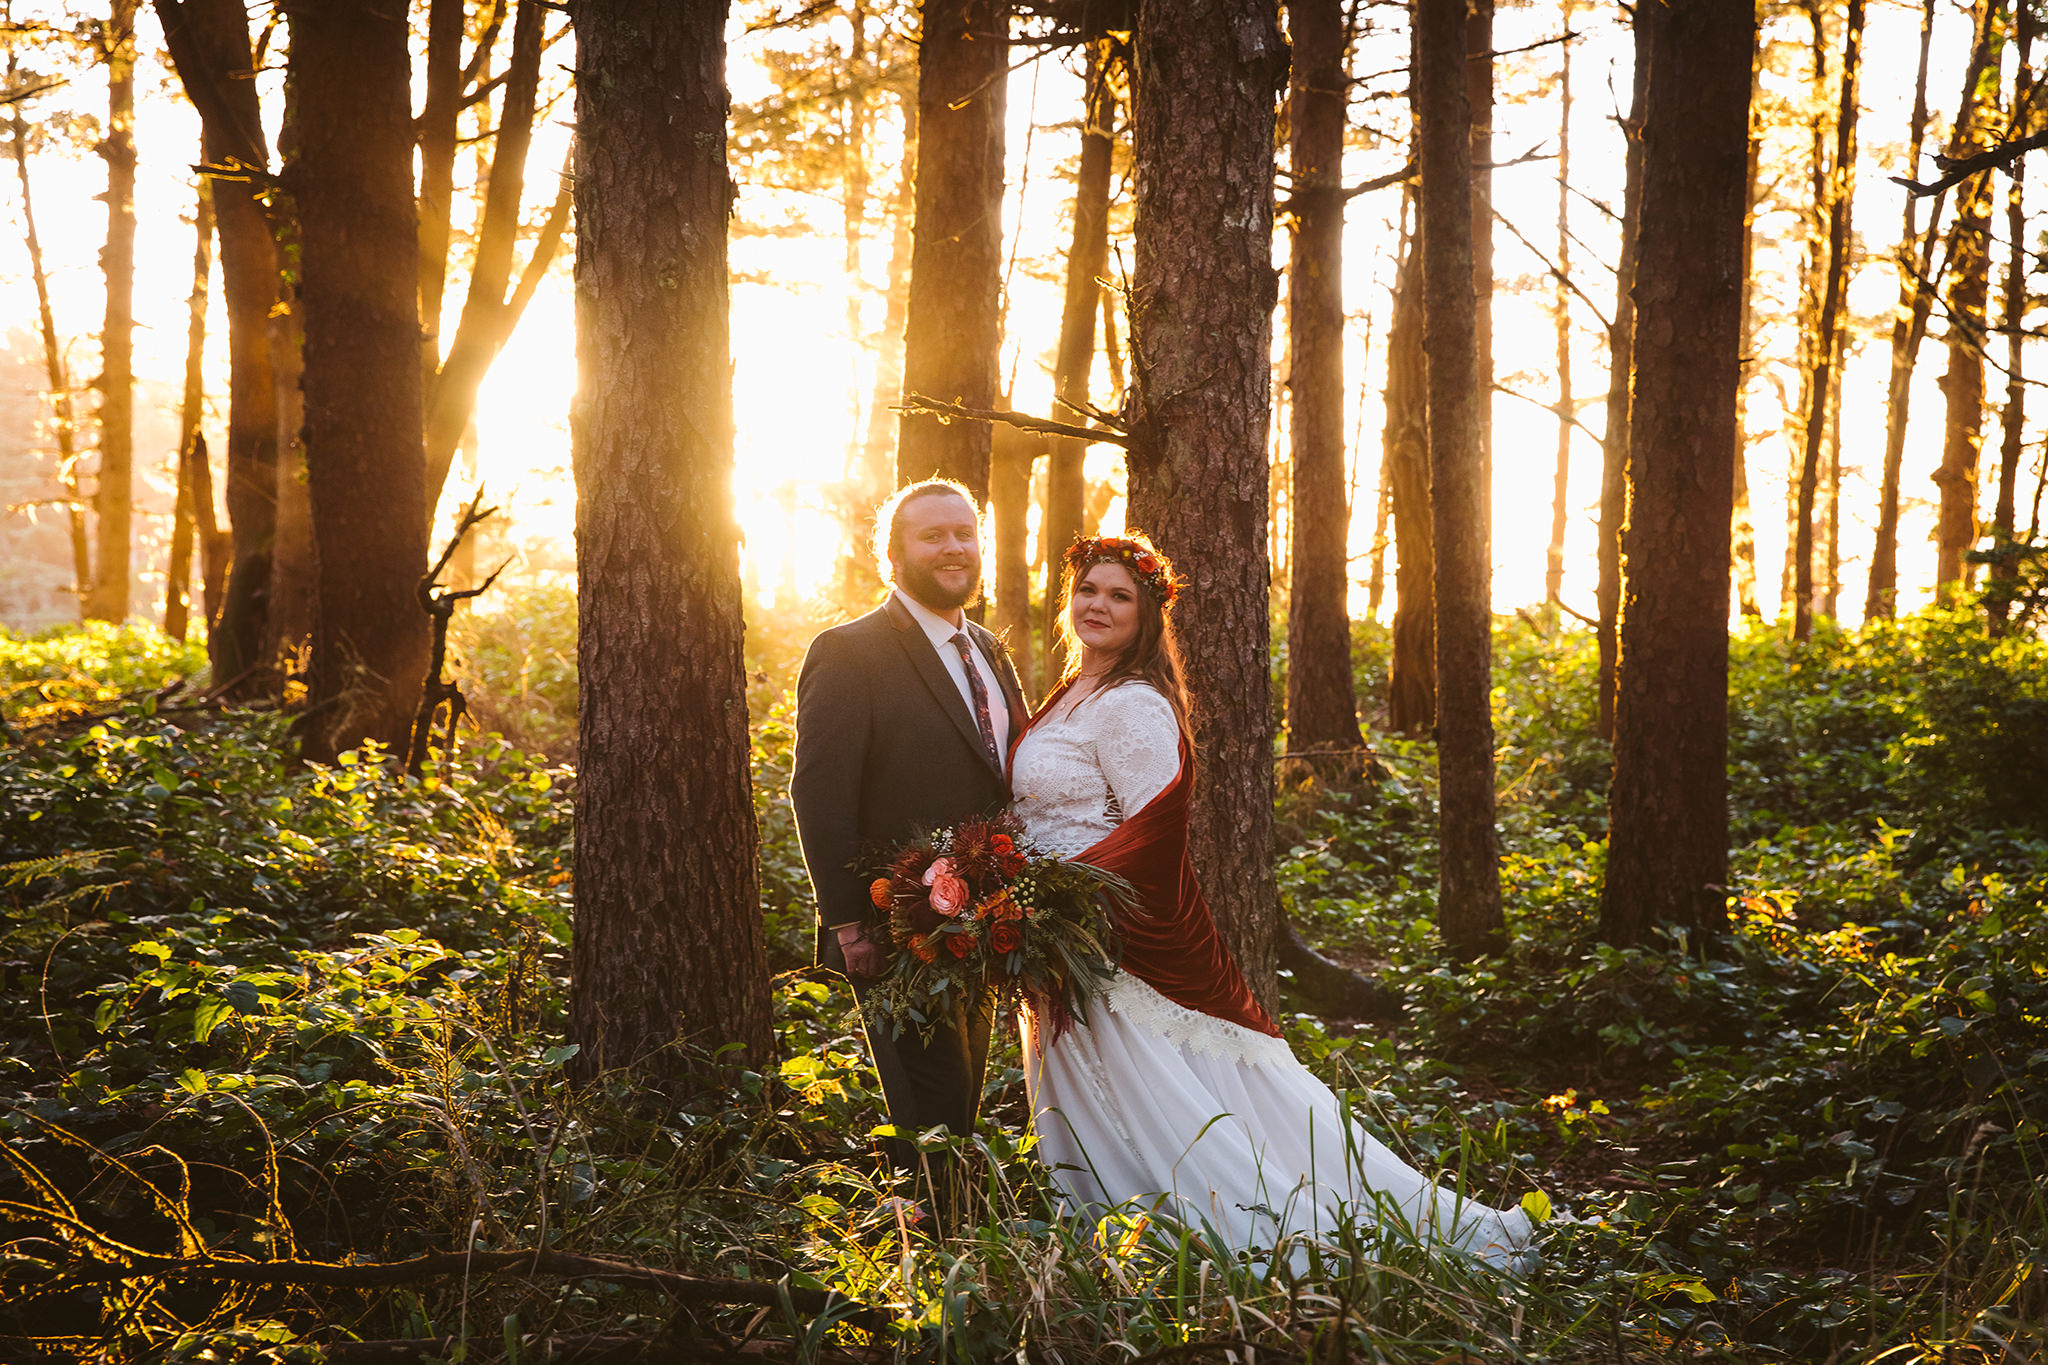 A wedding photo in the Oregon woods at golden hour